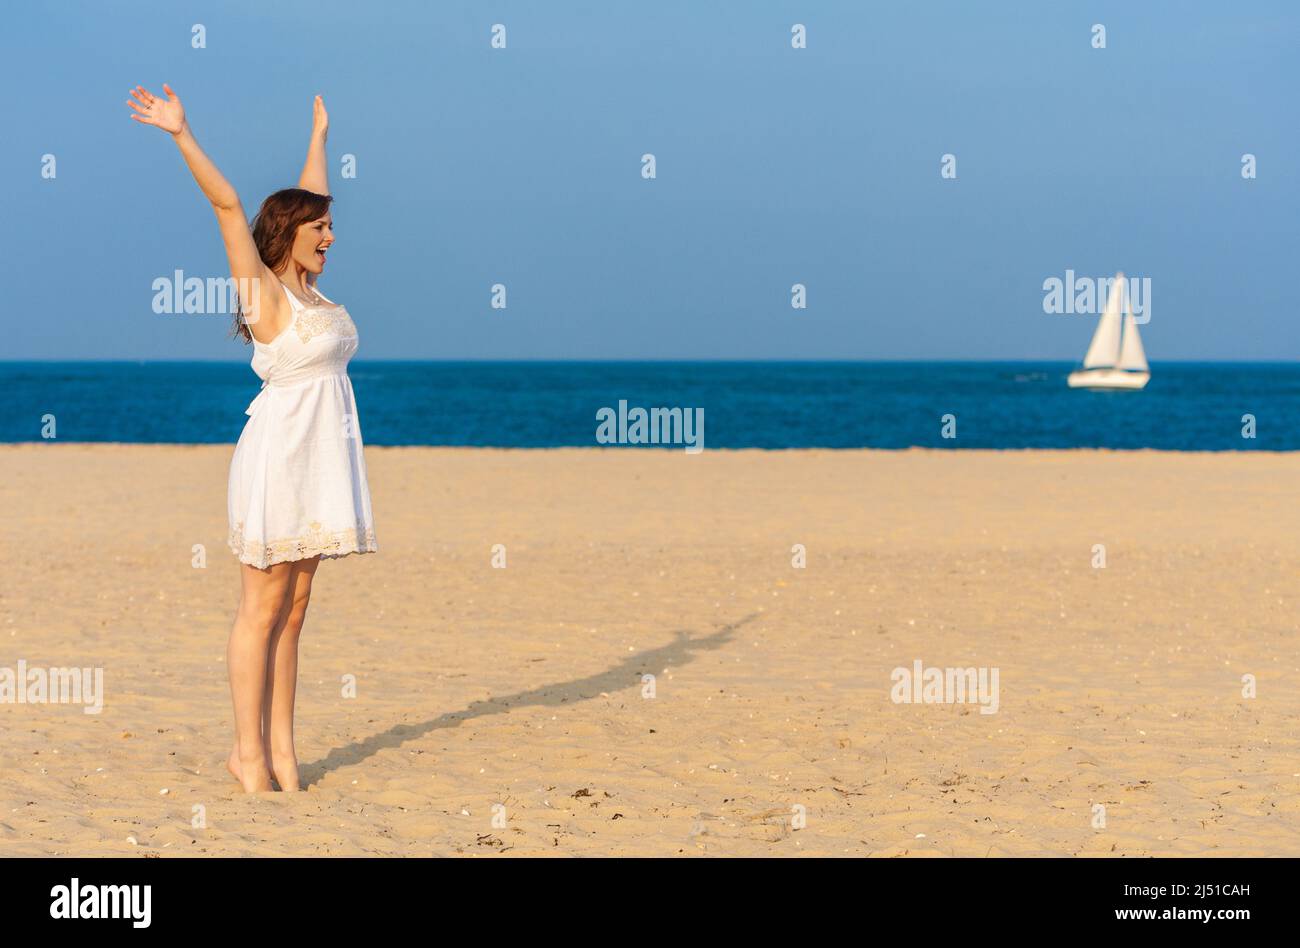 Young woman or girl standing on a beach celebrating arms raised on a beach with a white yacht or sail boat sailing at sea in background Stock Photo